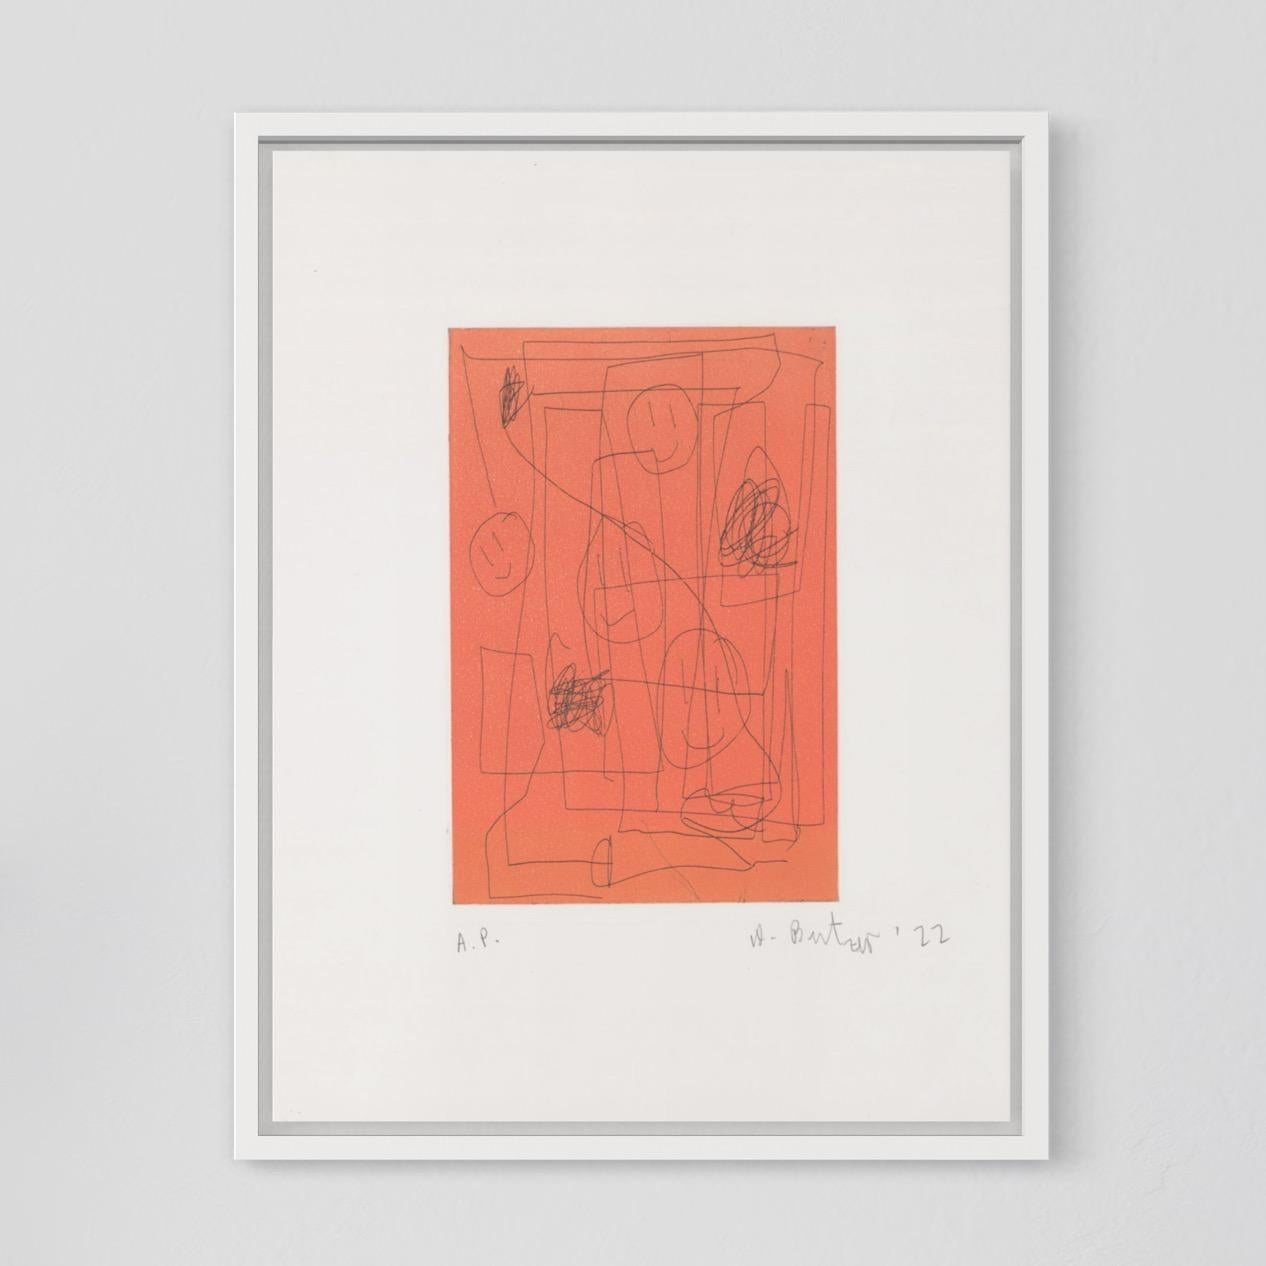 André Butzer (German, b. 1973)
Untitled (Smileys), 2019/2022
Medium: Etching in colors on wove paper
Dimensions: 43 x 33 cm
Edition of 15: Hand-signed, numbered and dated in pencil
Condition: Mint